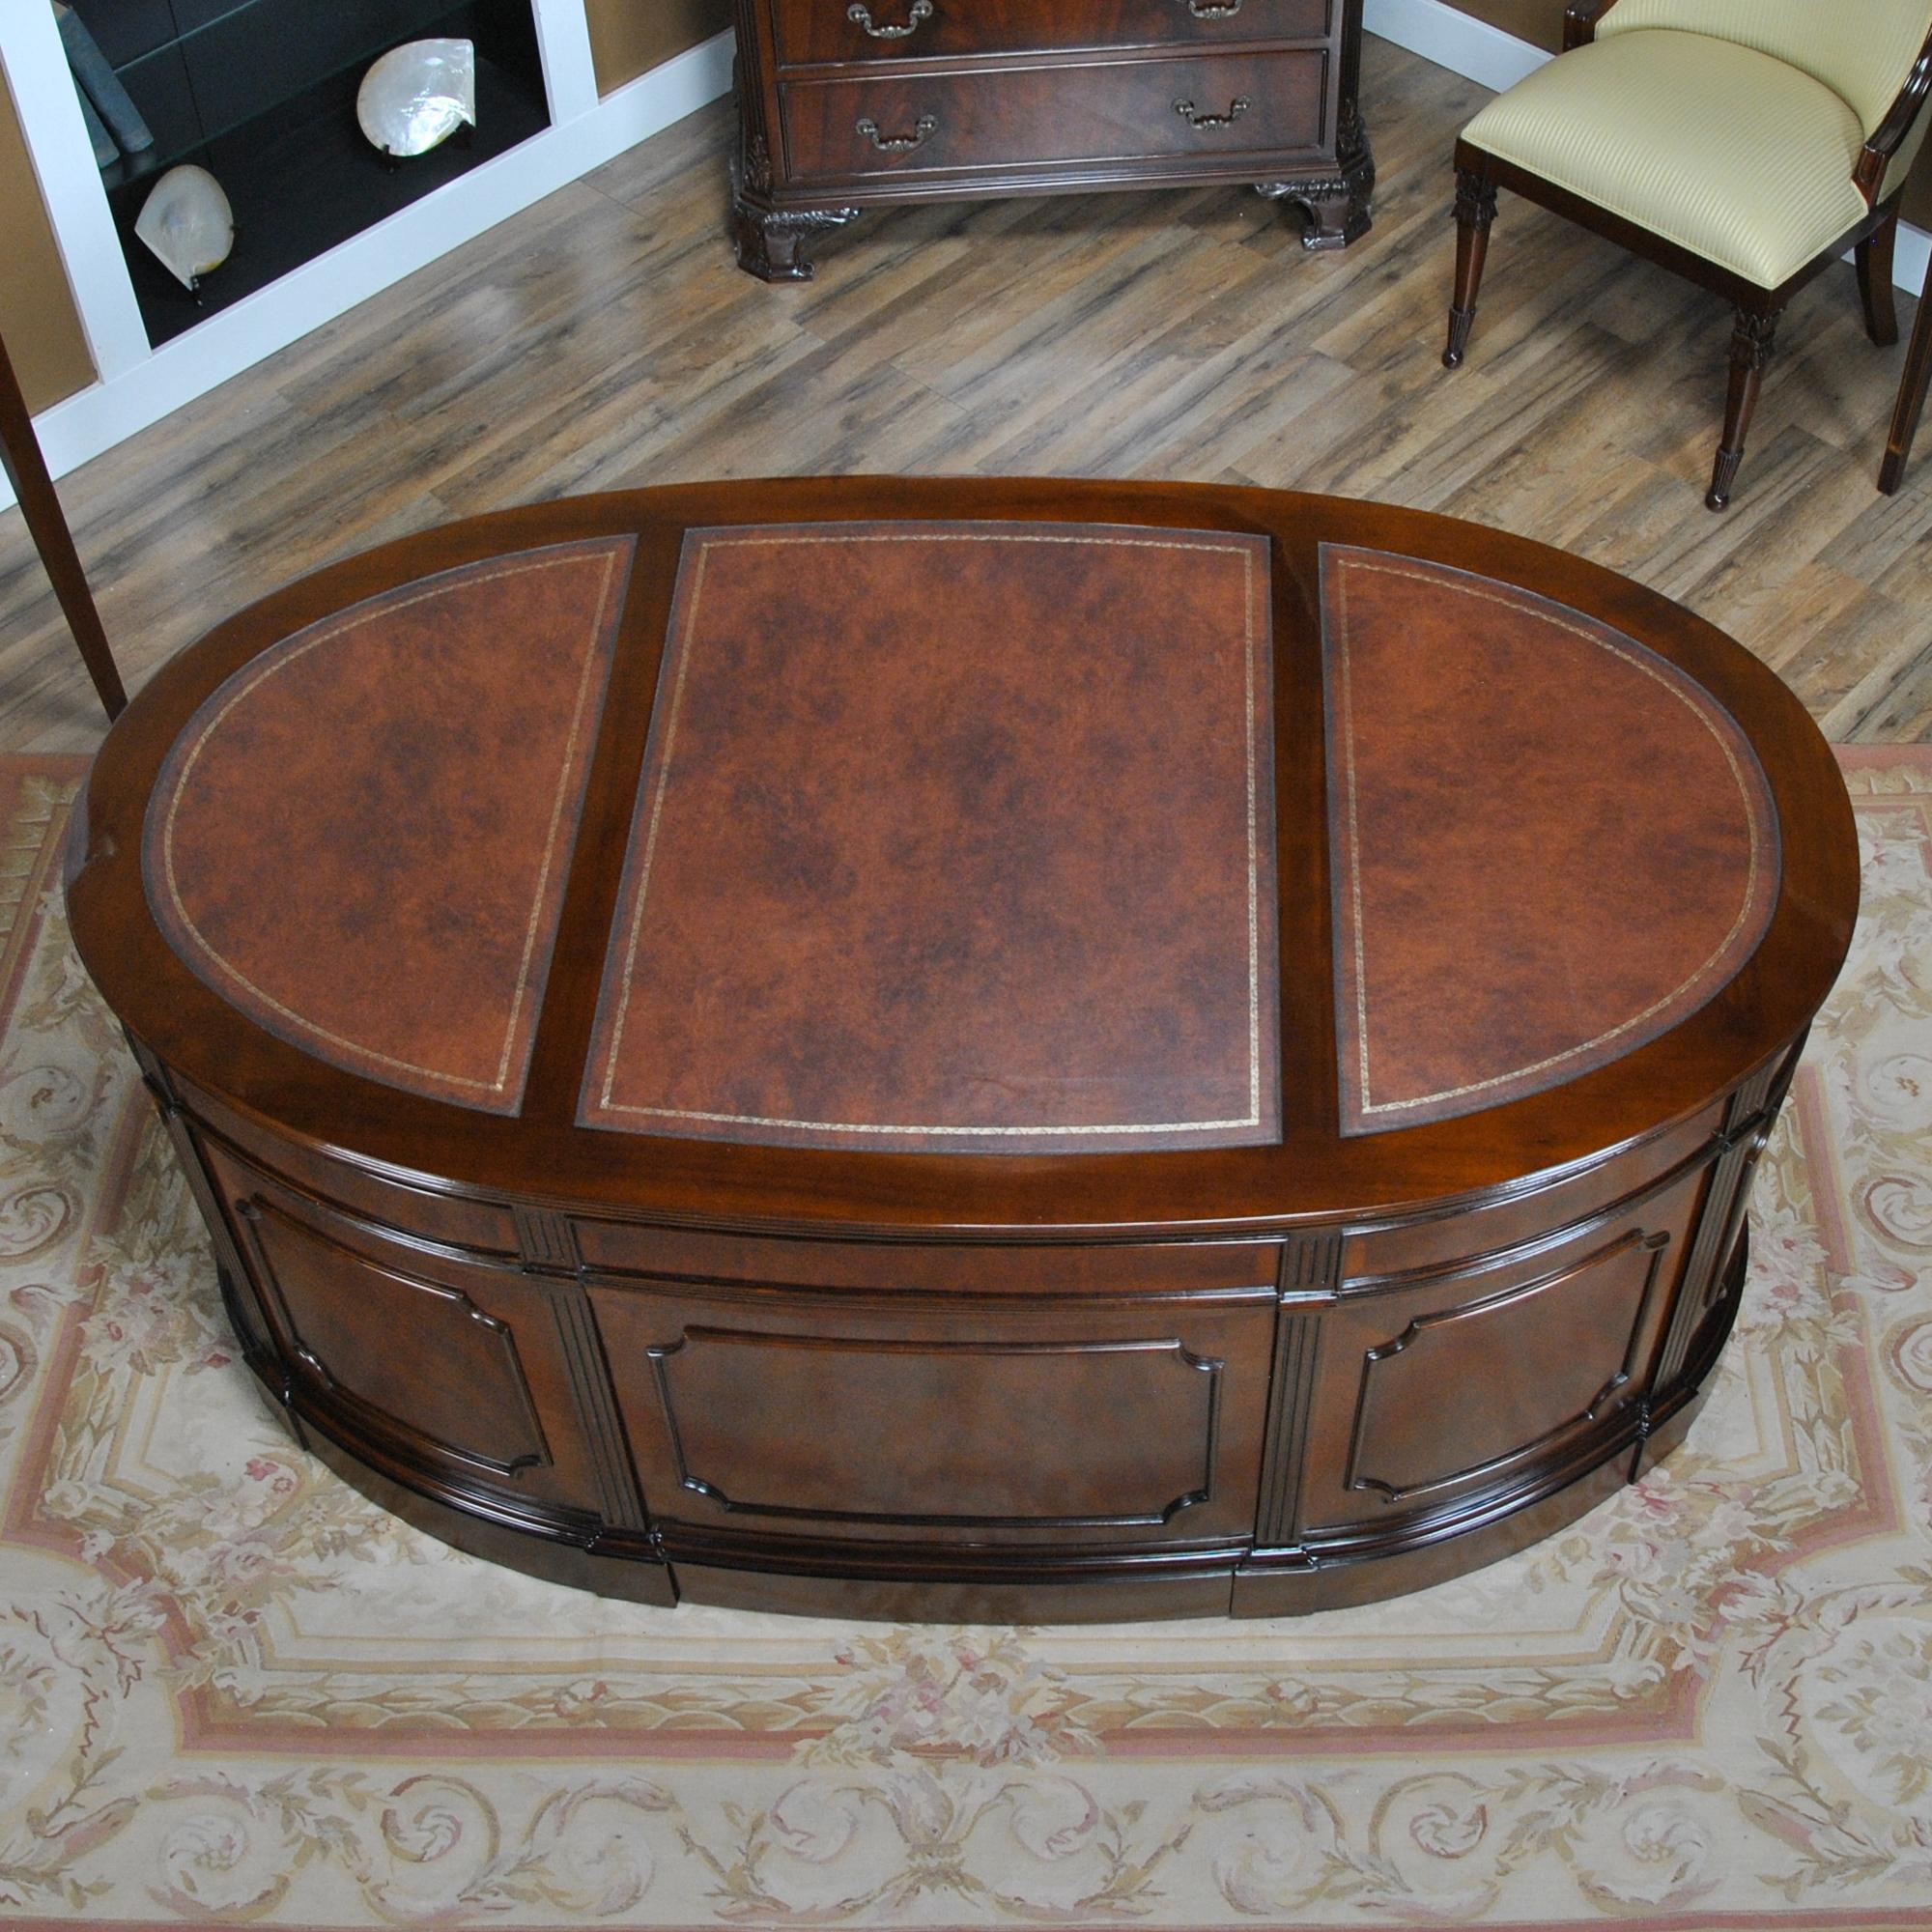 Renaissance Oval Leather Top Desk with Privacy Panel For Sale